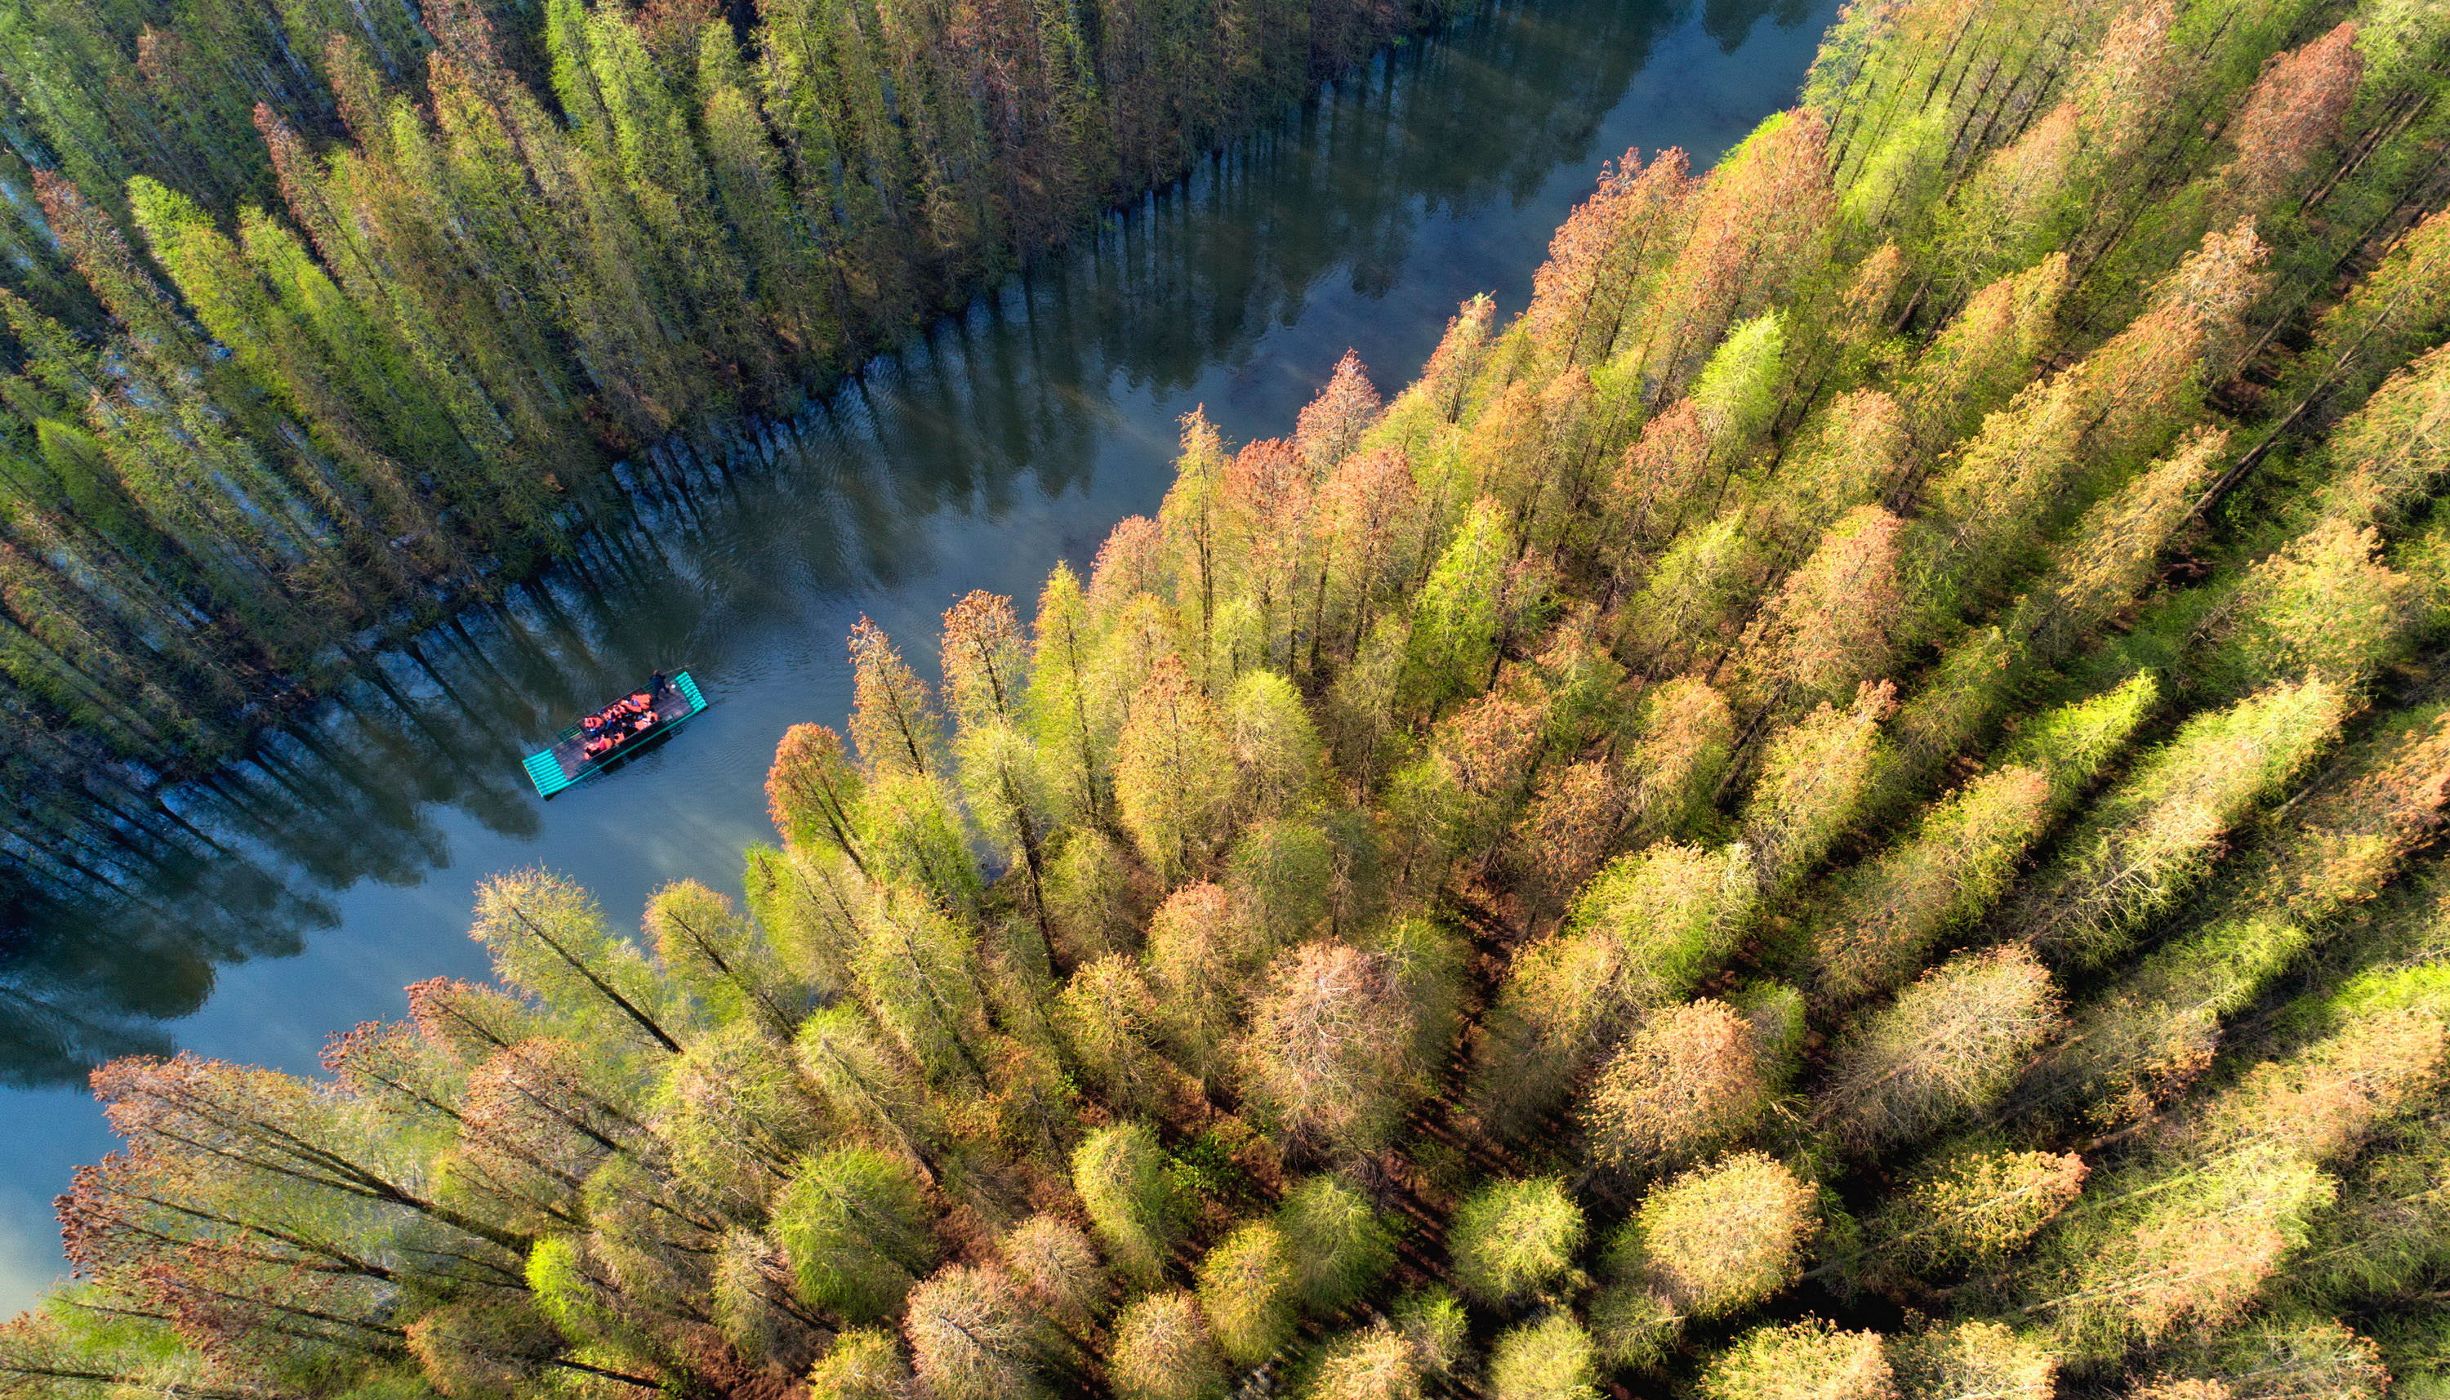 A boat travels down a river through the forest in China